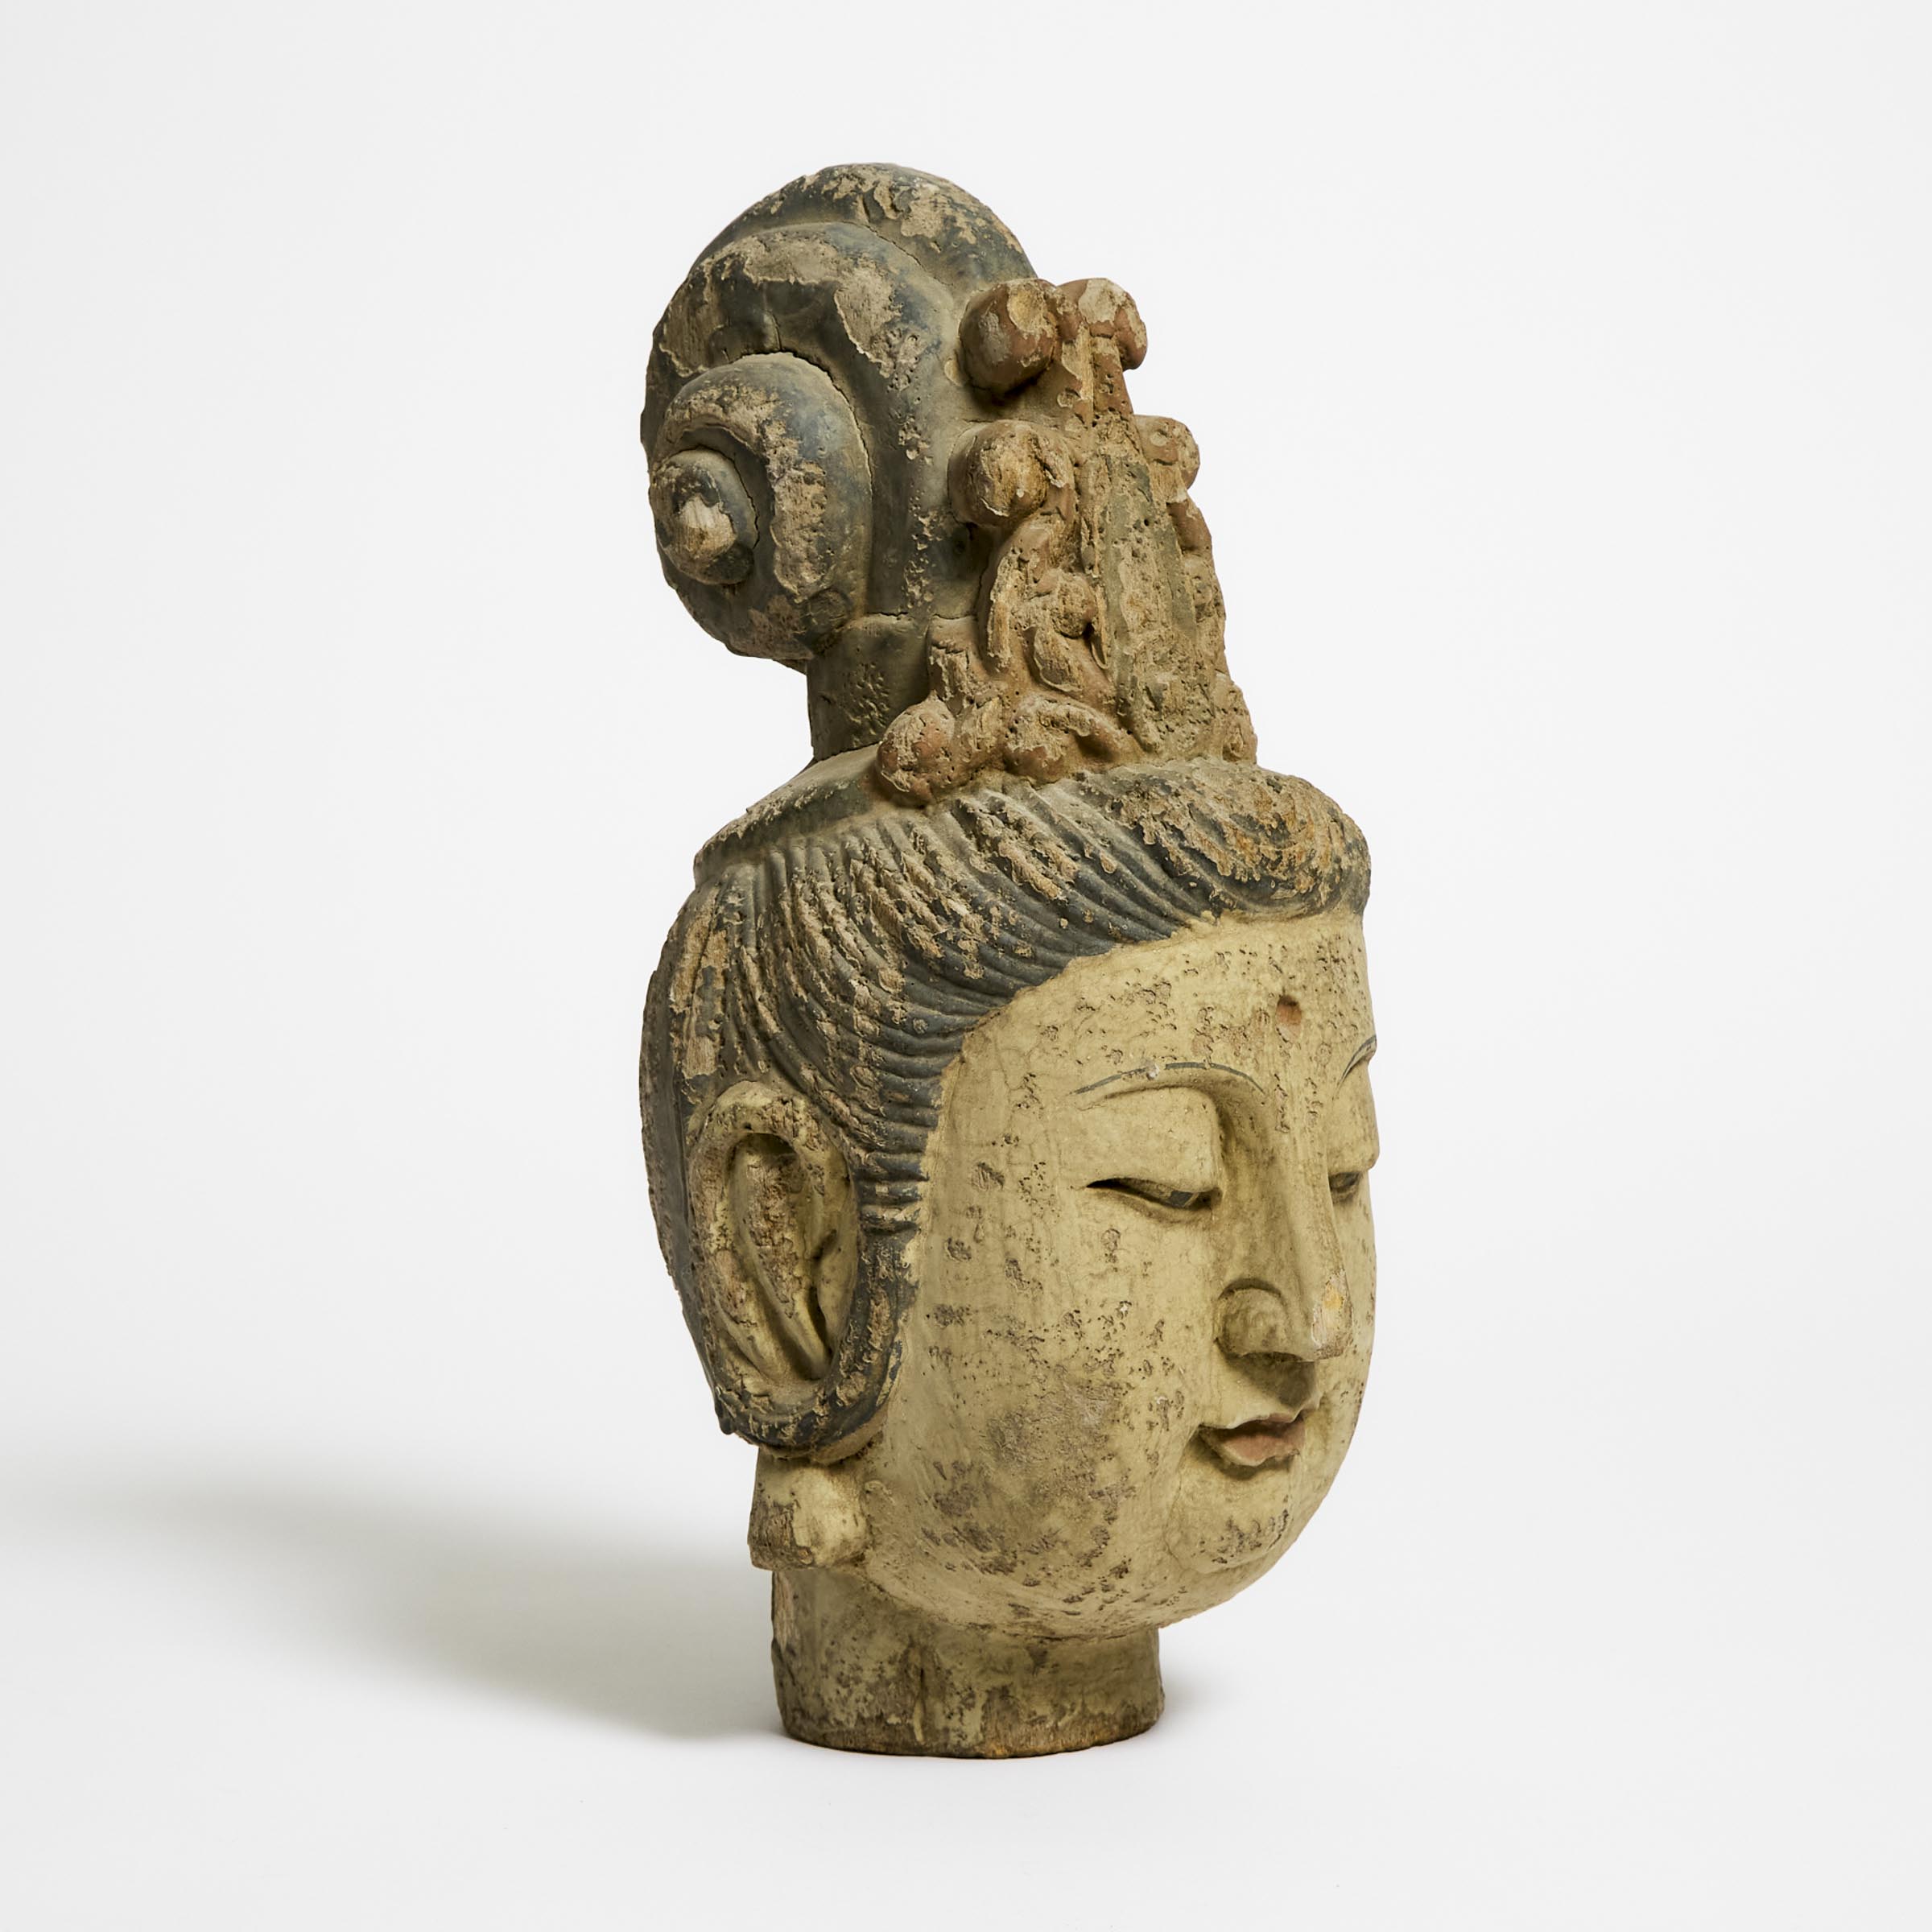 A Polychrome-Painted Wood and Stucco Head of Guanyin, Ming Dynasty or Later 